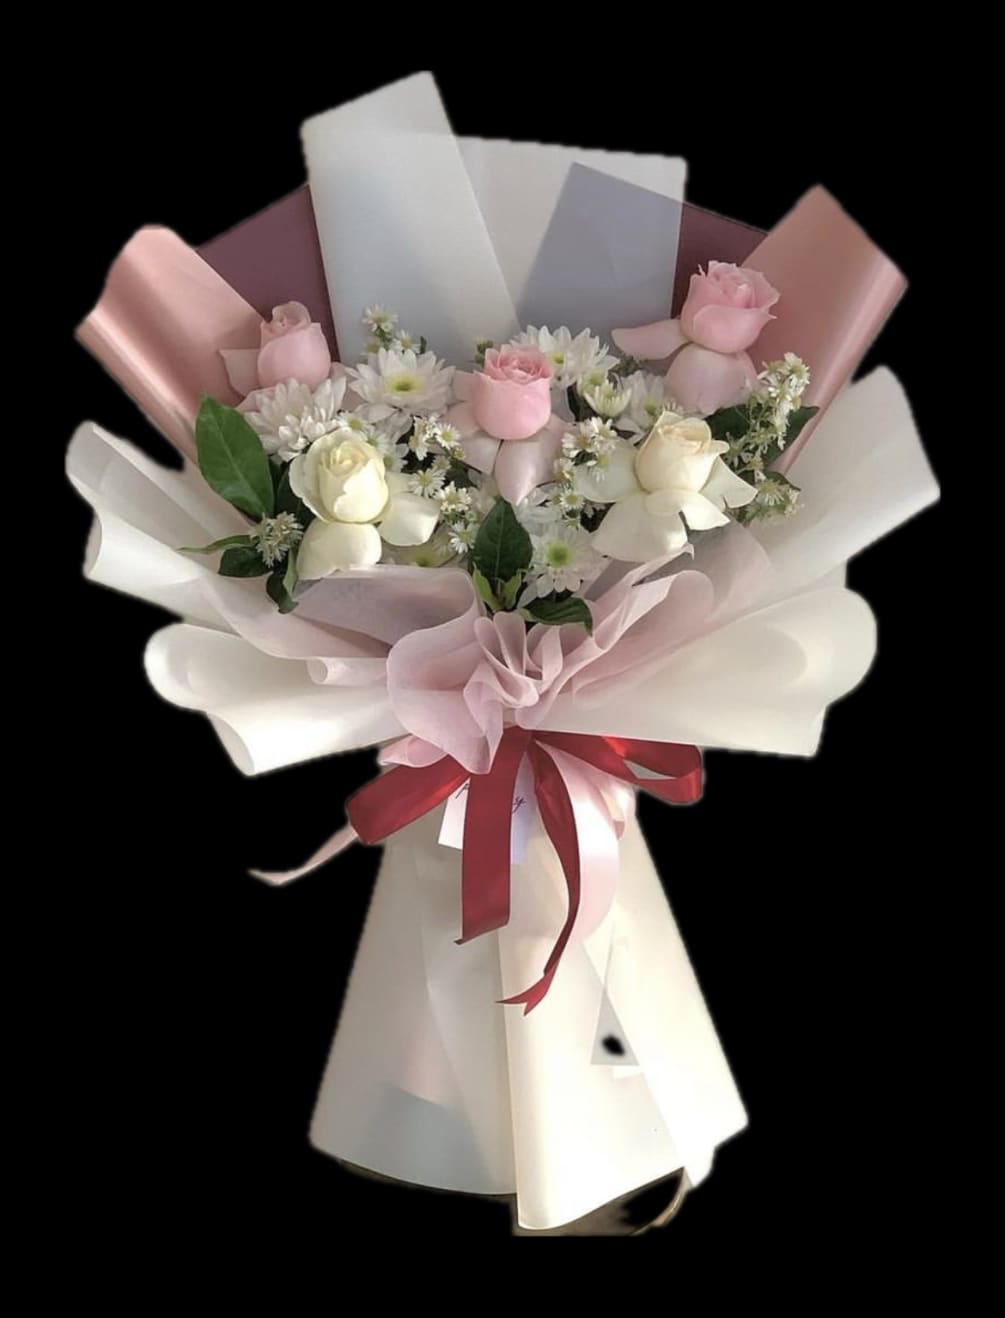 Beautiful Bouquet for special occasions mixed with white and pink roses.